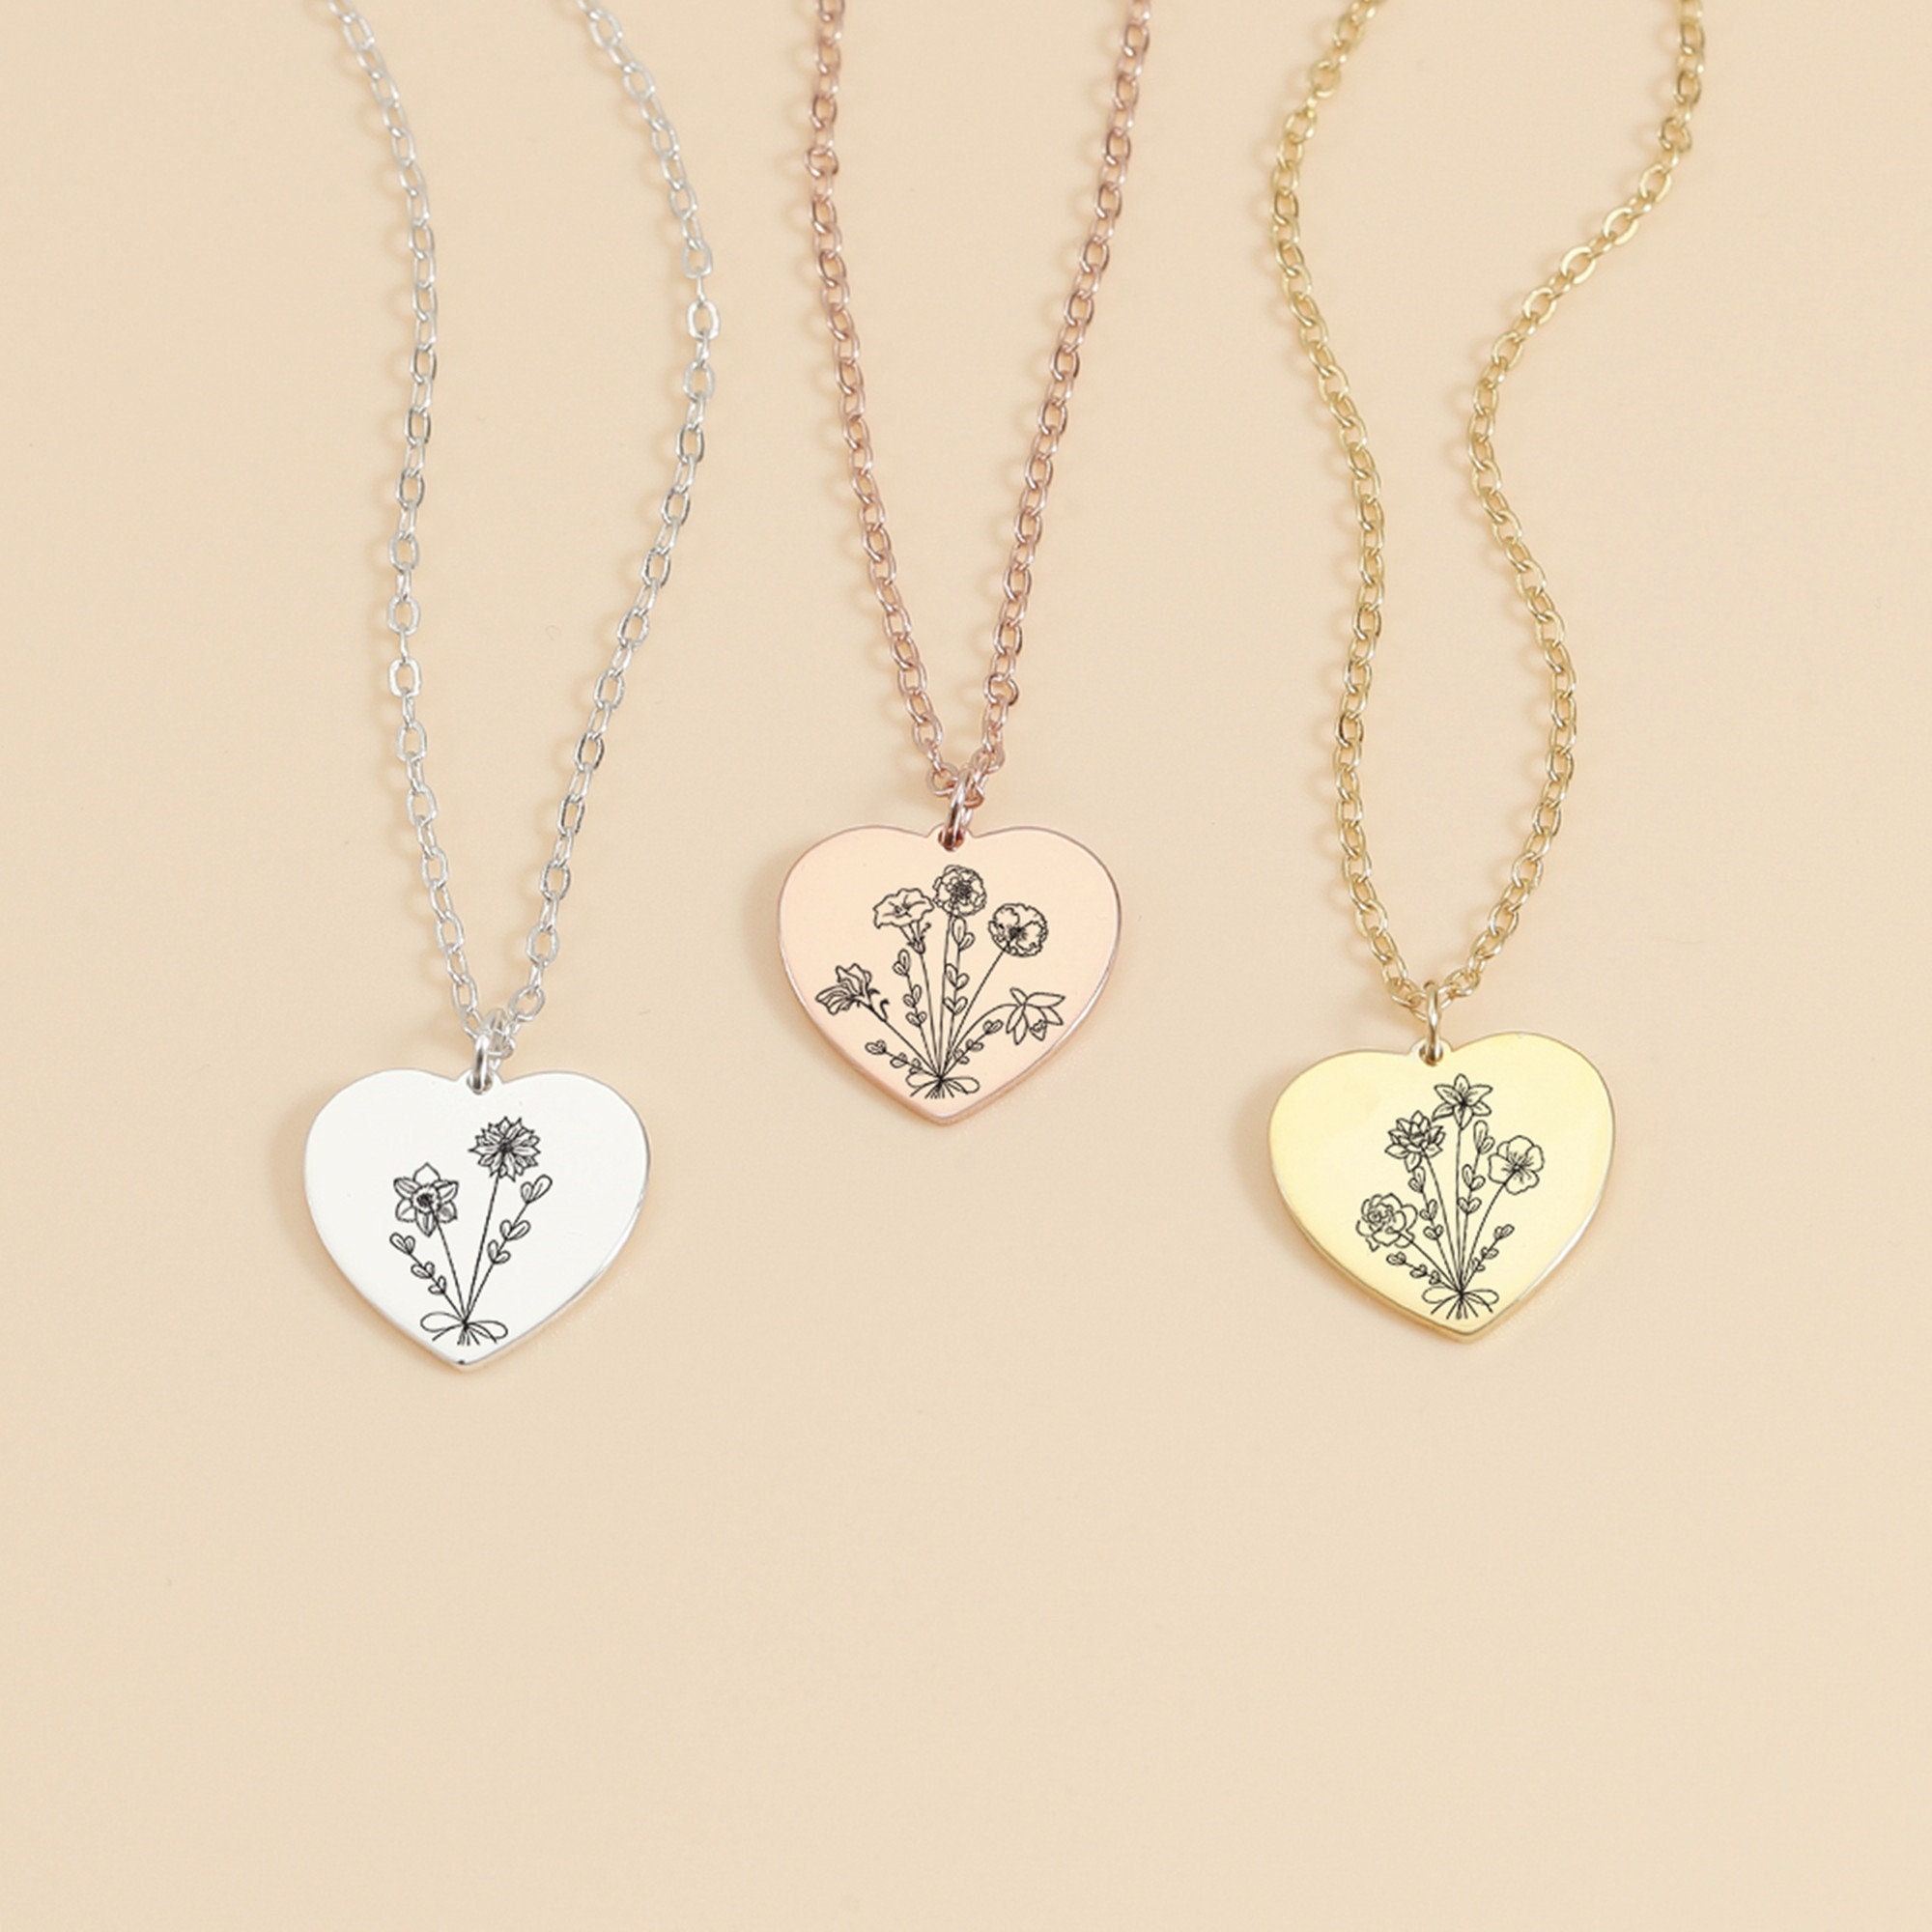 Dainty Birth Flower Necklace in Heart Personalized Engraved - Etsy UK